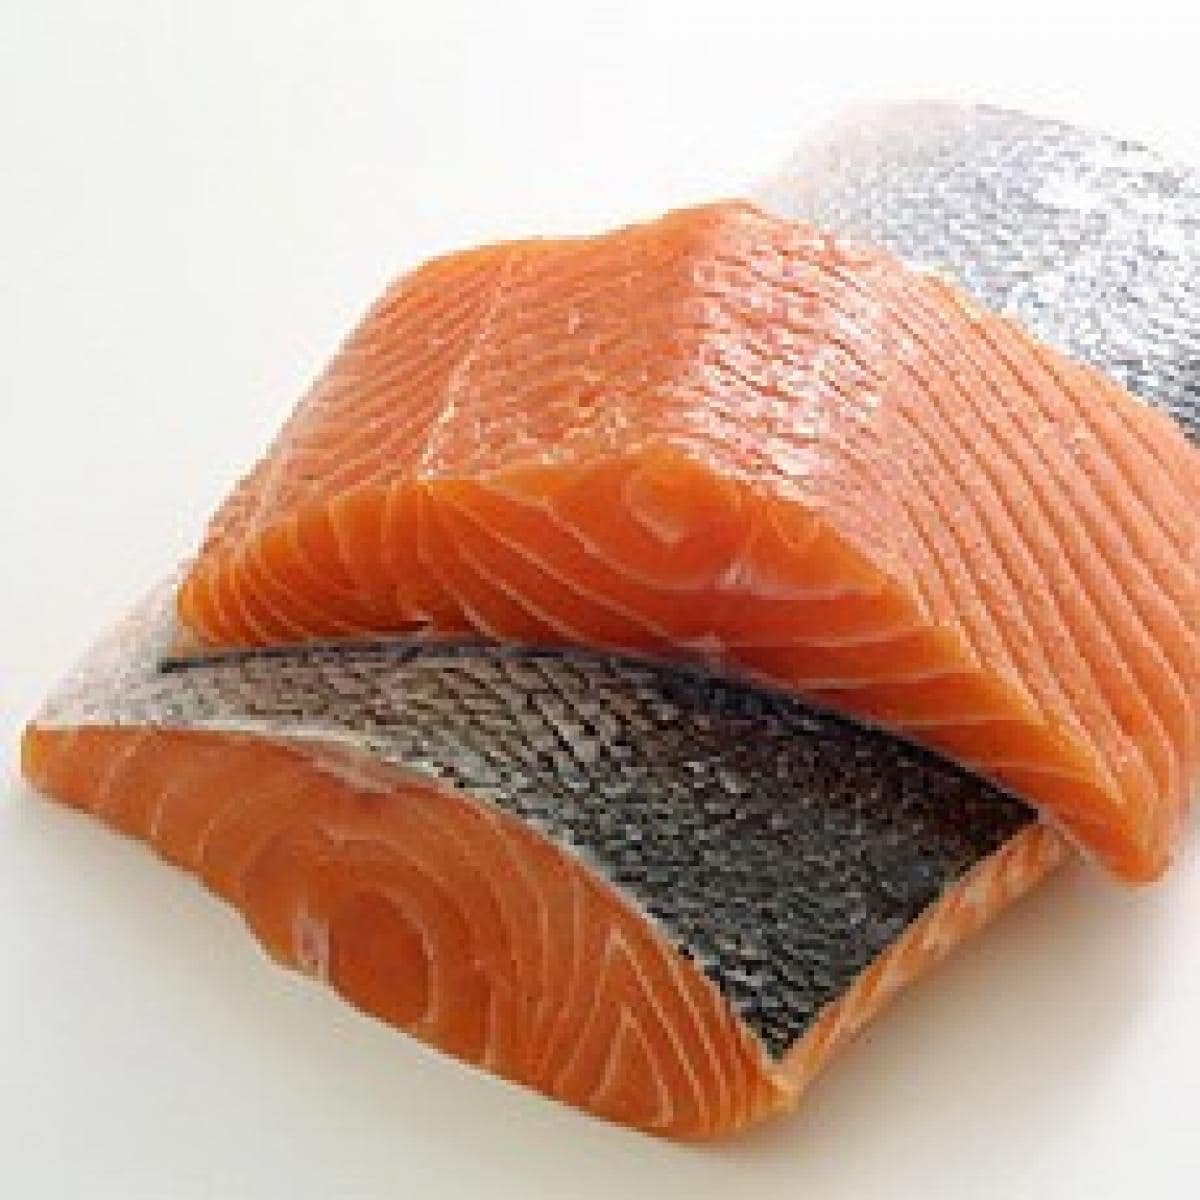 Two pieces of salmon on a white surface.